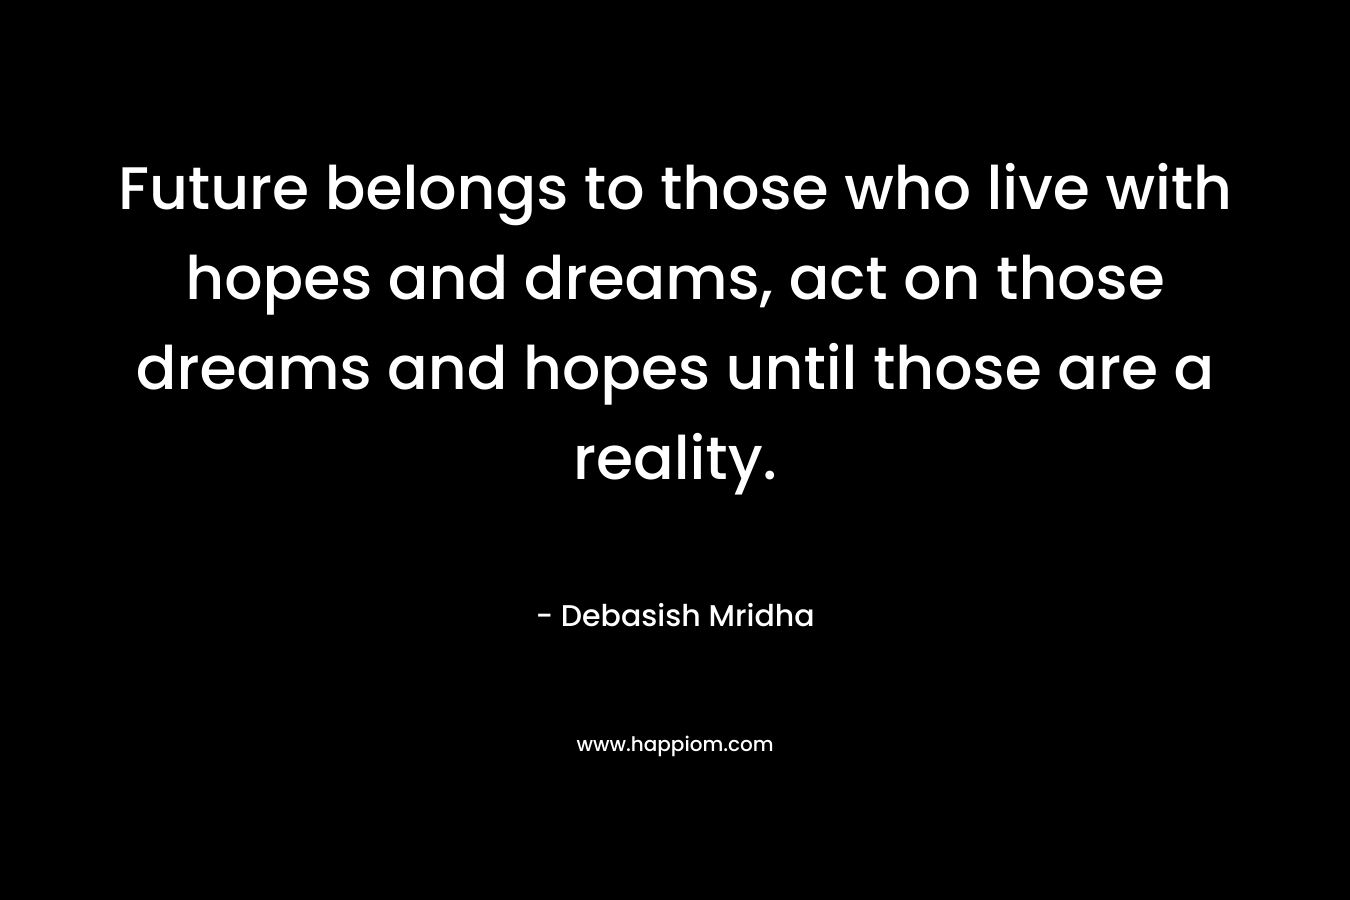 Future belongs to those who live with hopes and dreams, act on those dreams and hopes until those are a reality.